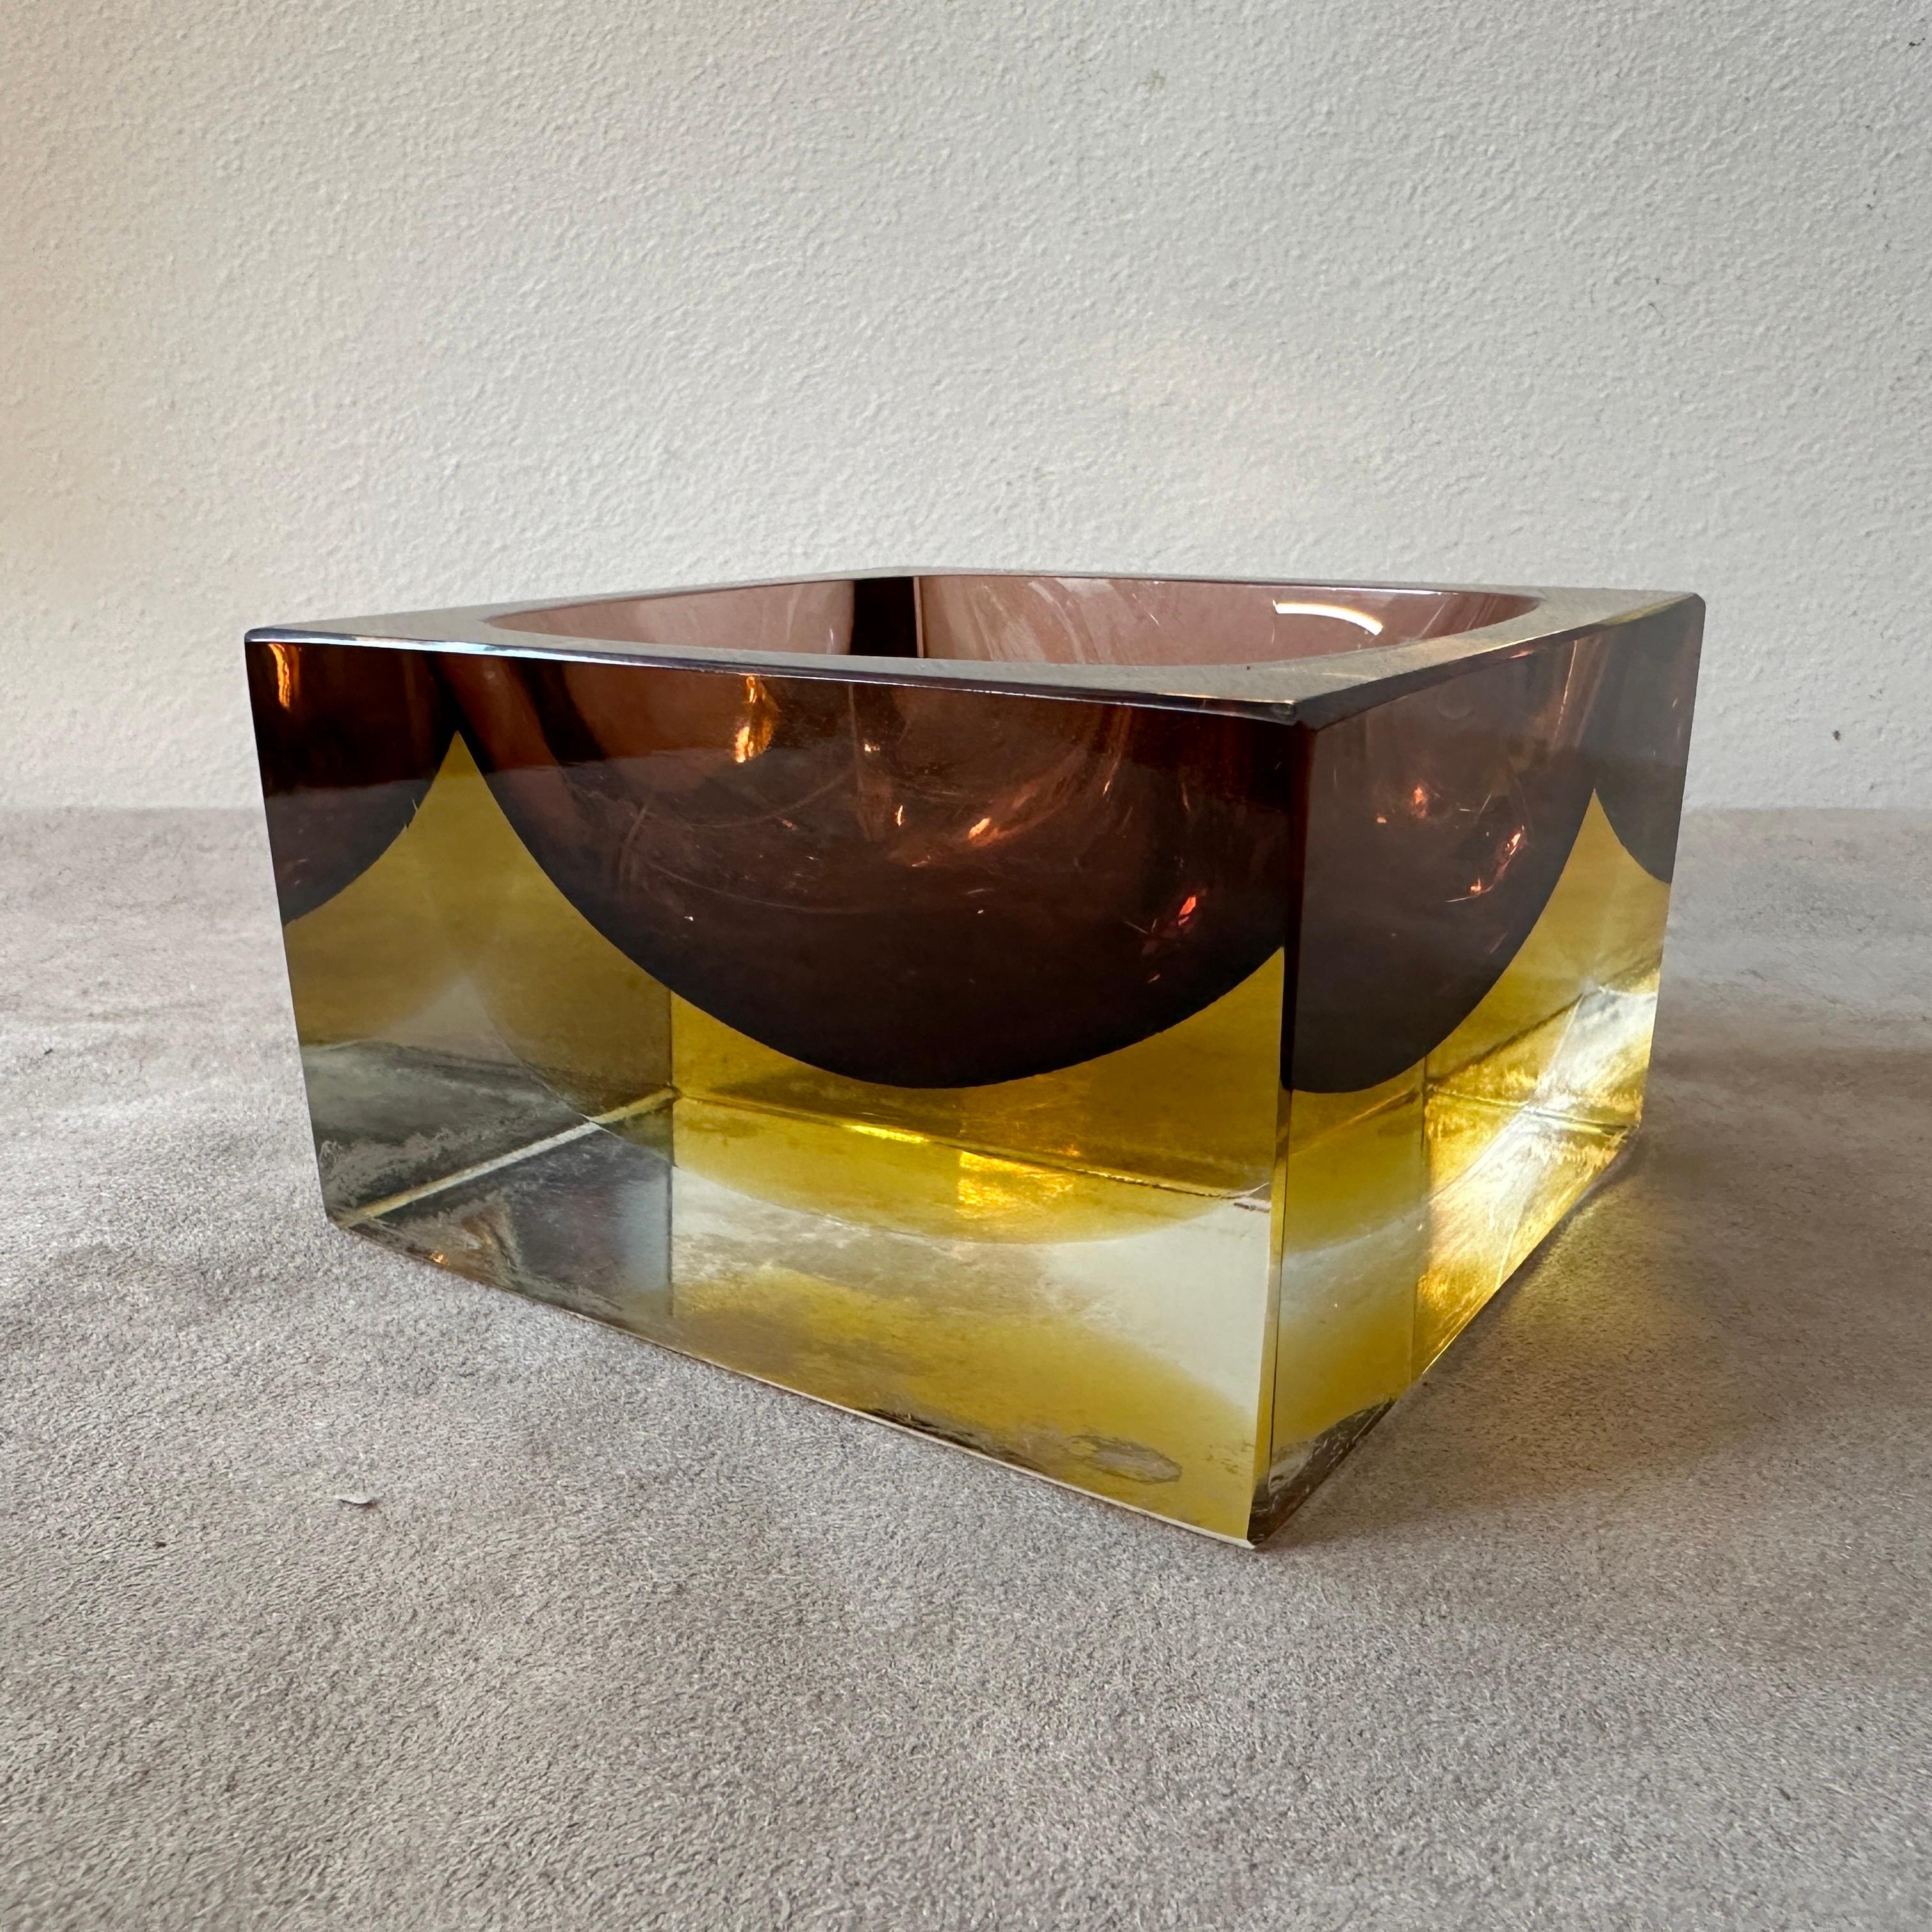 This Murano Glass Square Ashtray by Mandruzzato is a stunning example of mid-century modern design, blending traditional craftsmanship with contemporary style. It serves as both a functional object and a piece of art, adding a touch of elegance and